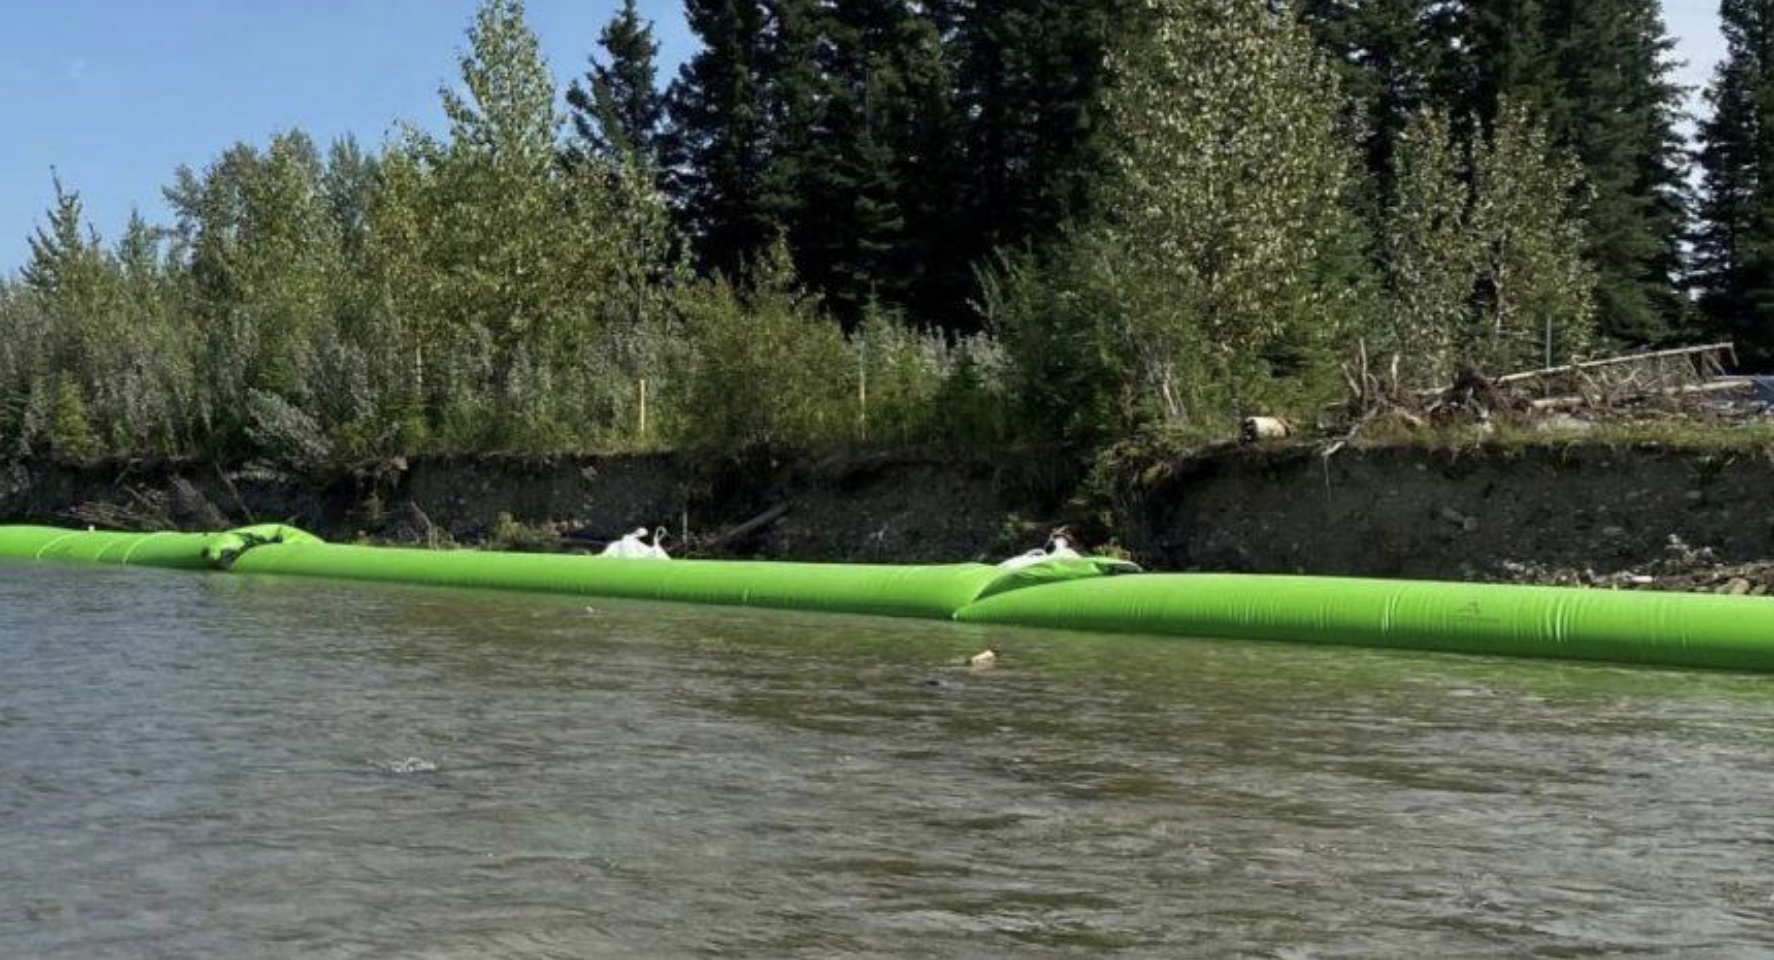 Lime green flood barrier in the water